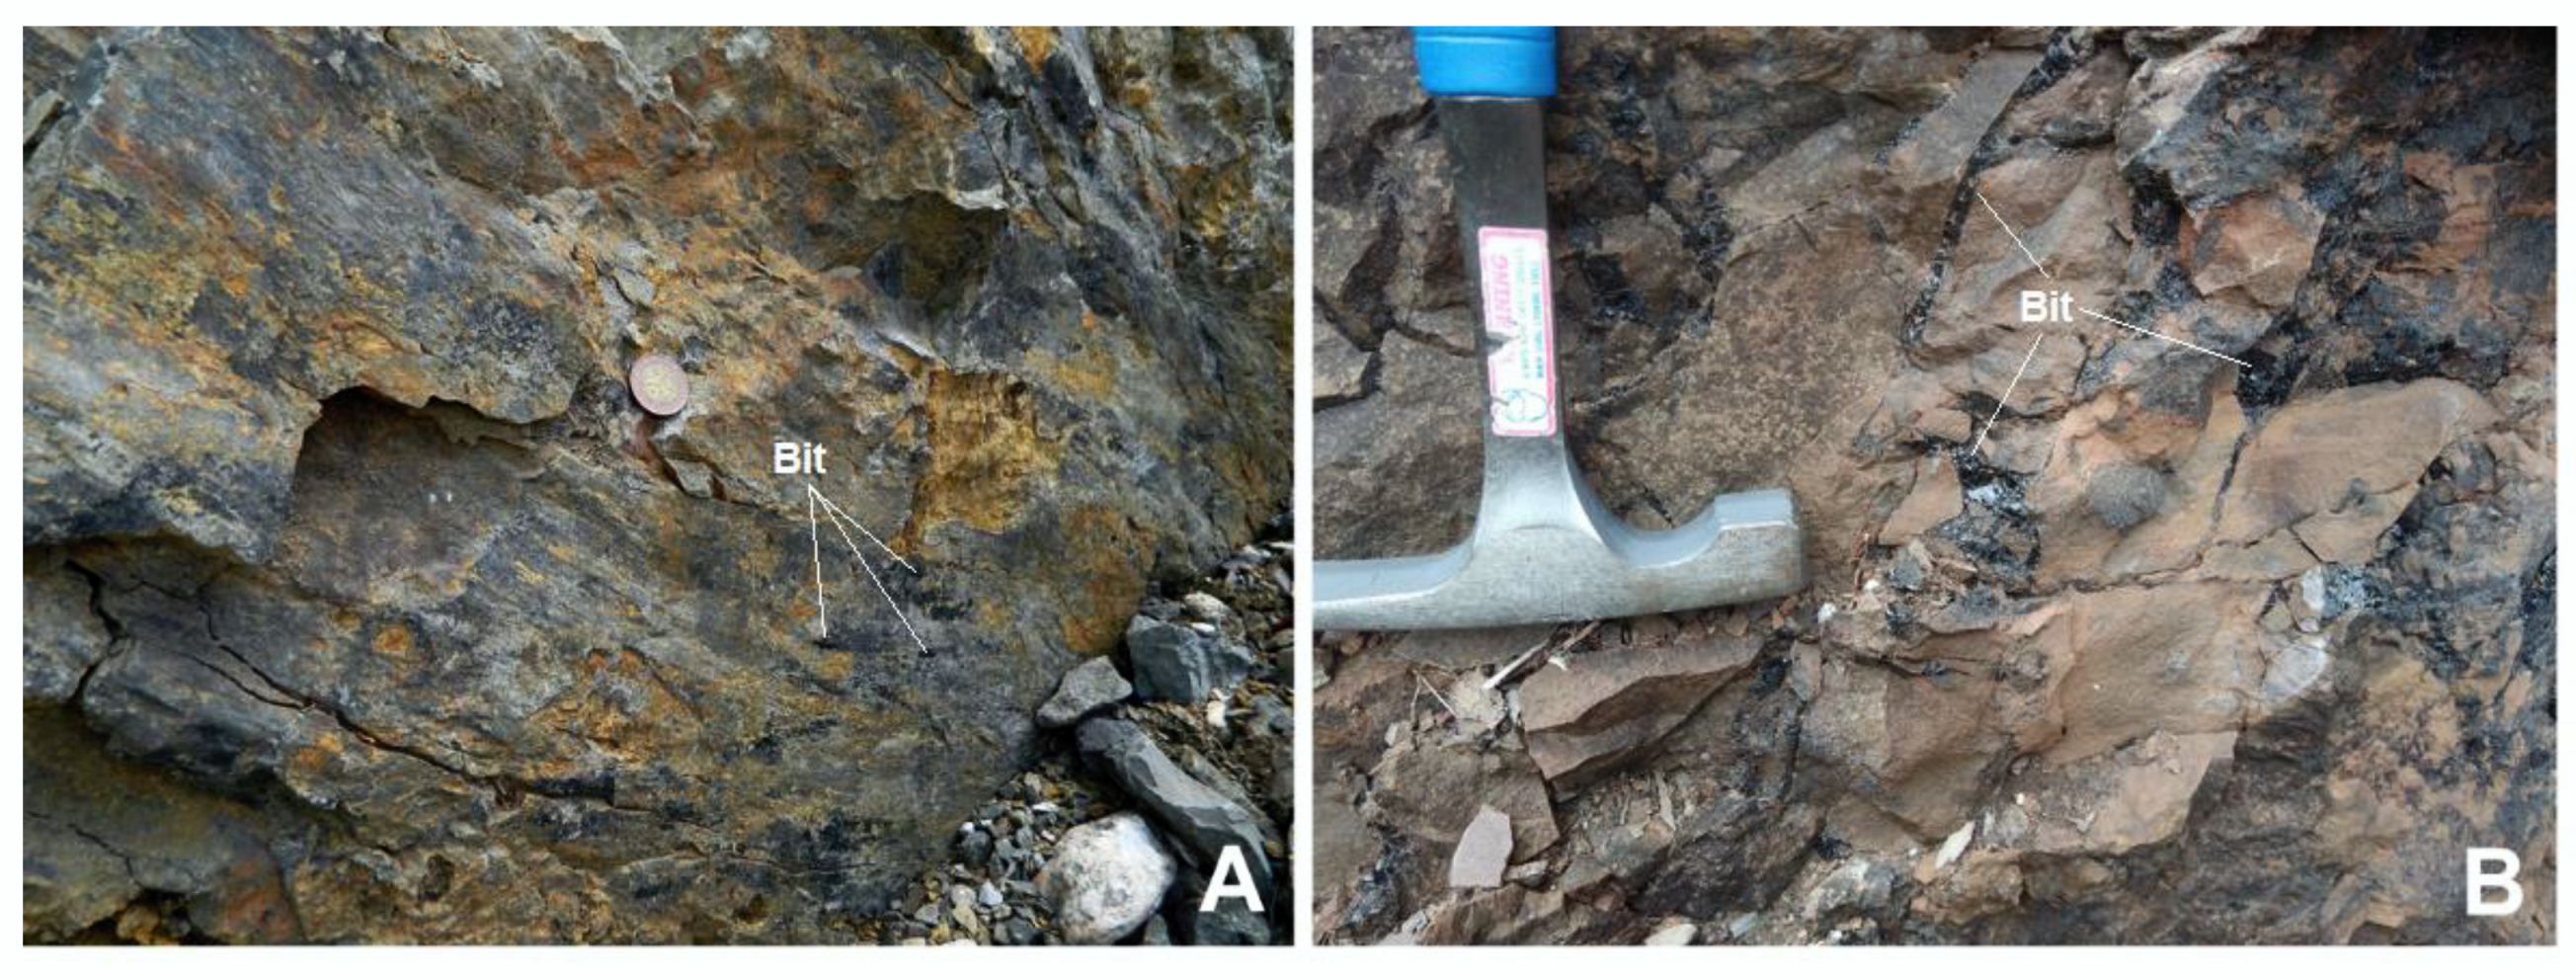 Minerals | Free Full-Text | Geology and Petrography of Uraniferous Bitumens  in Permo-Carboniferous Sediments (Vrchlab&iacute;, Czech Republic) | HTML